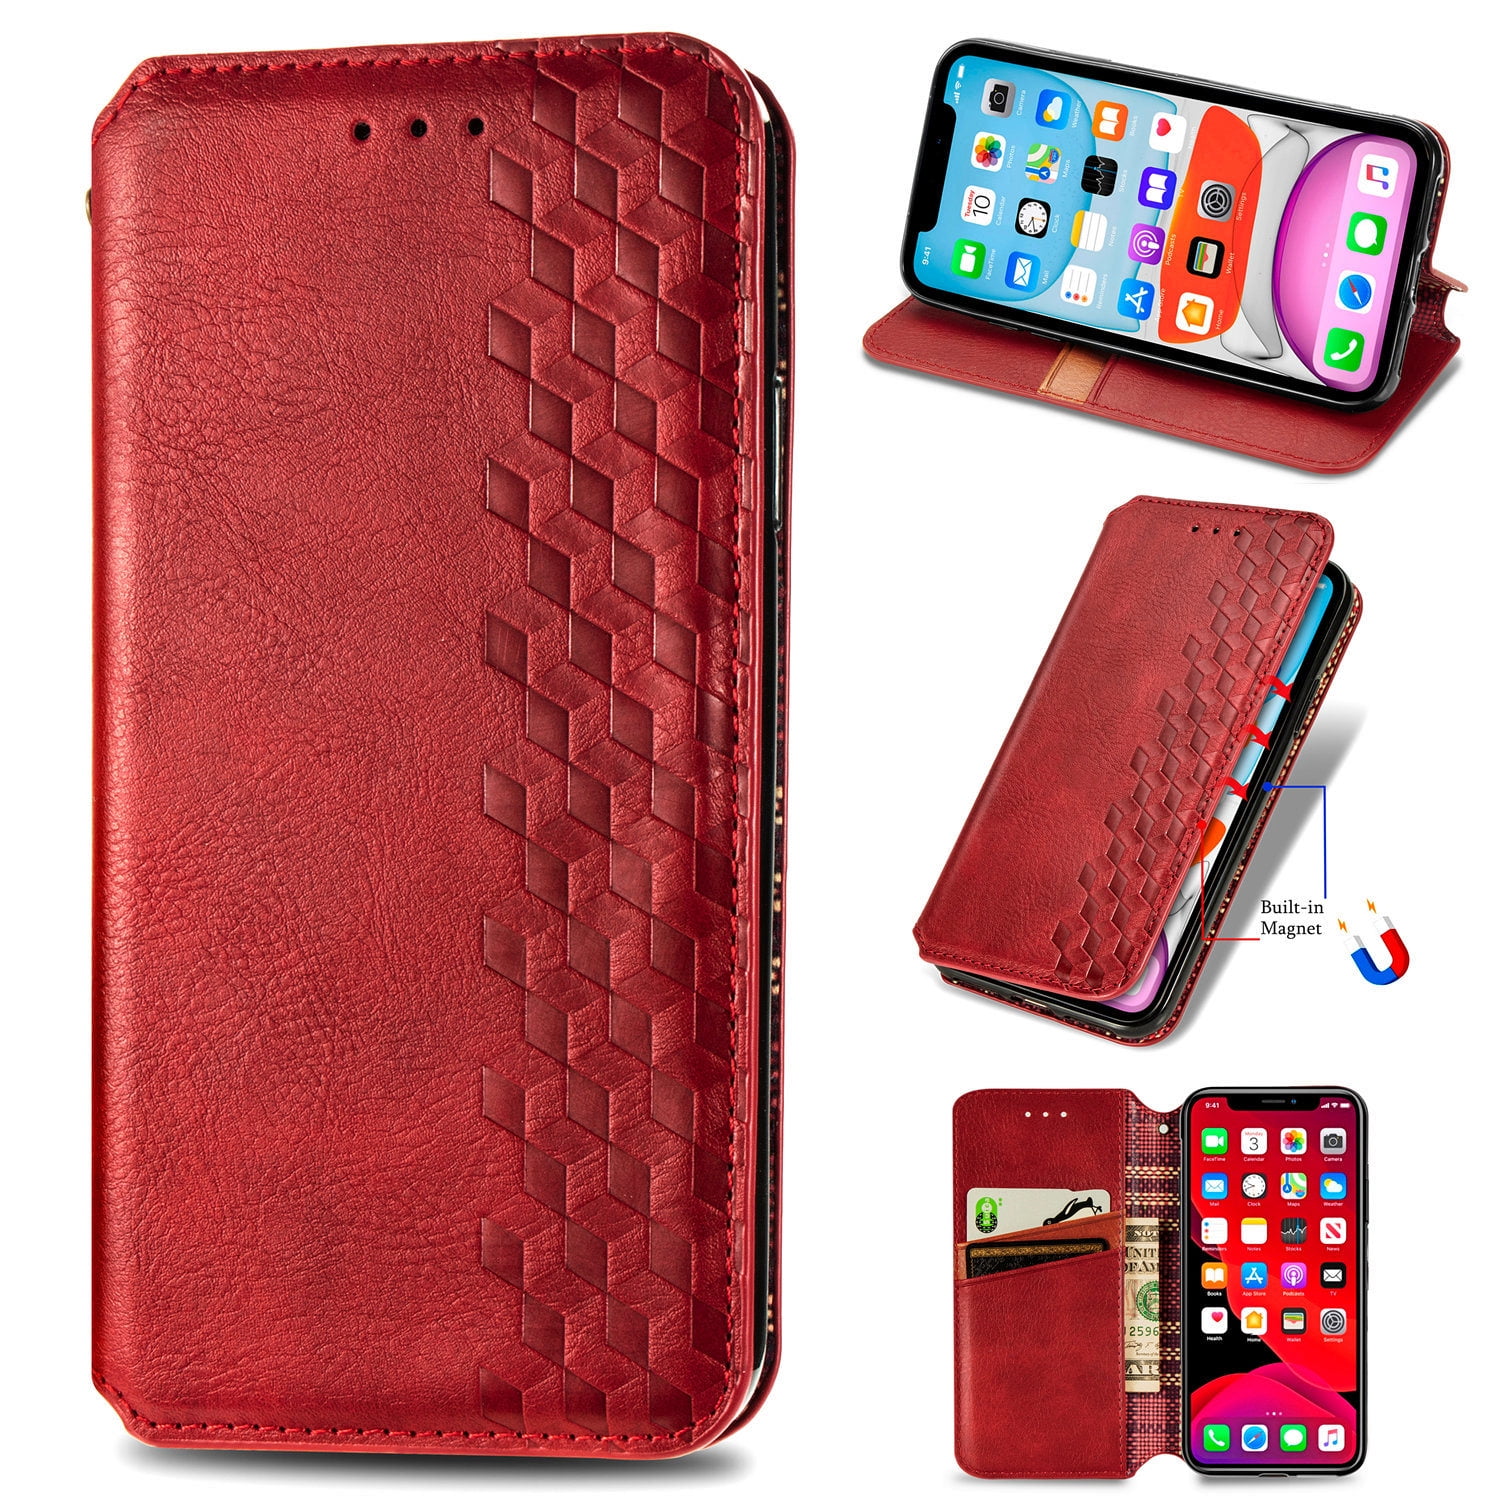 Flip Leather Wallet Phone Case Protective Shockproof Cover with Card Holder Inside Makeup Mirror for Apple iPhone XR 6.1 2018 WWW iPhone XR Case, Red Luxurious Romantic Carved Flower